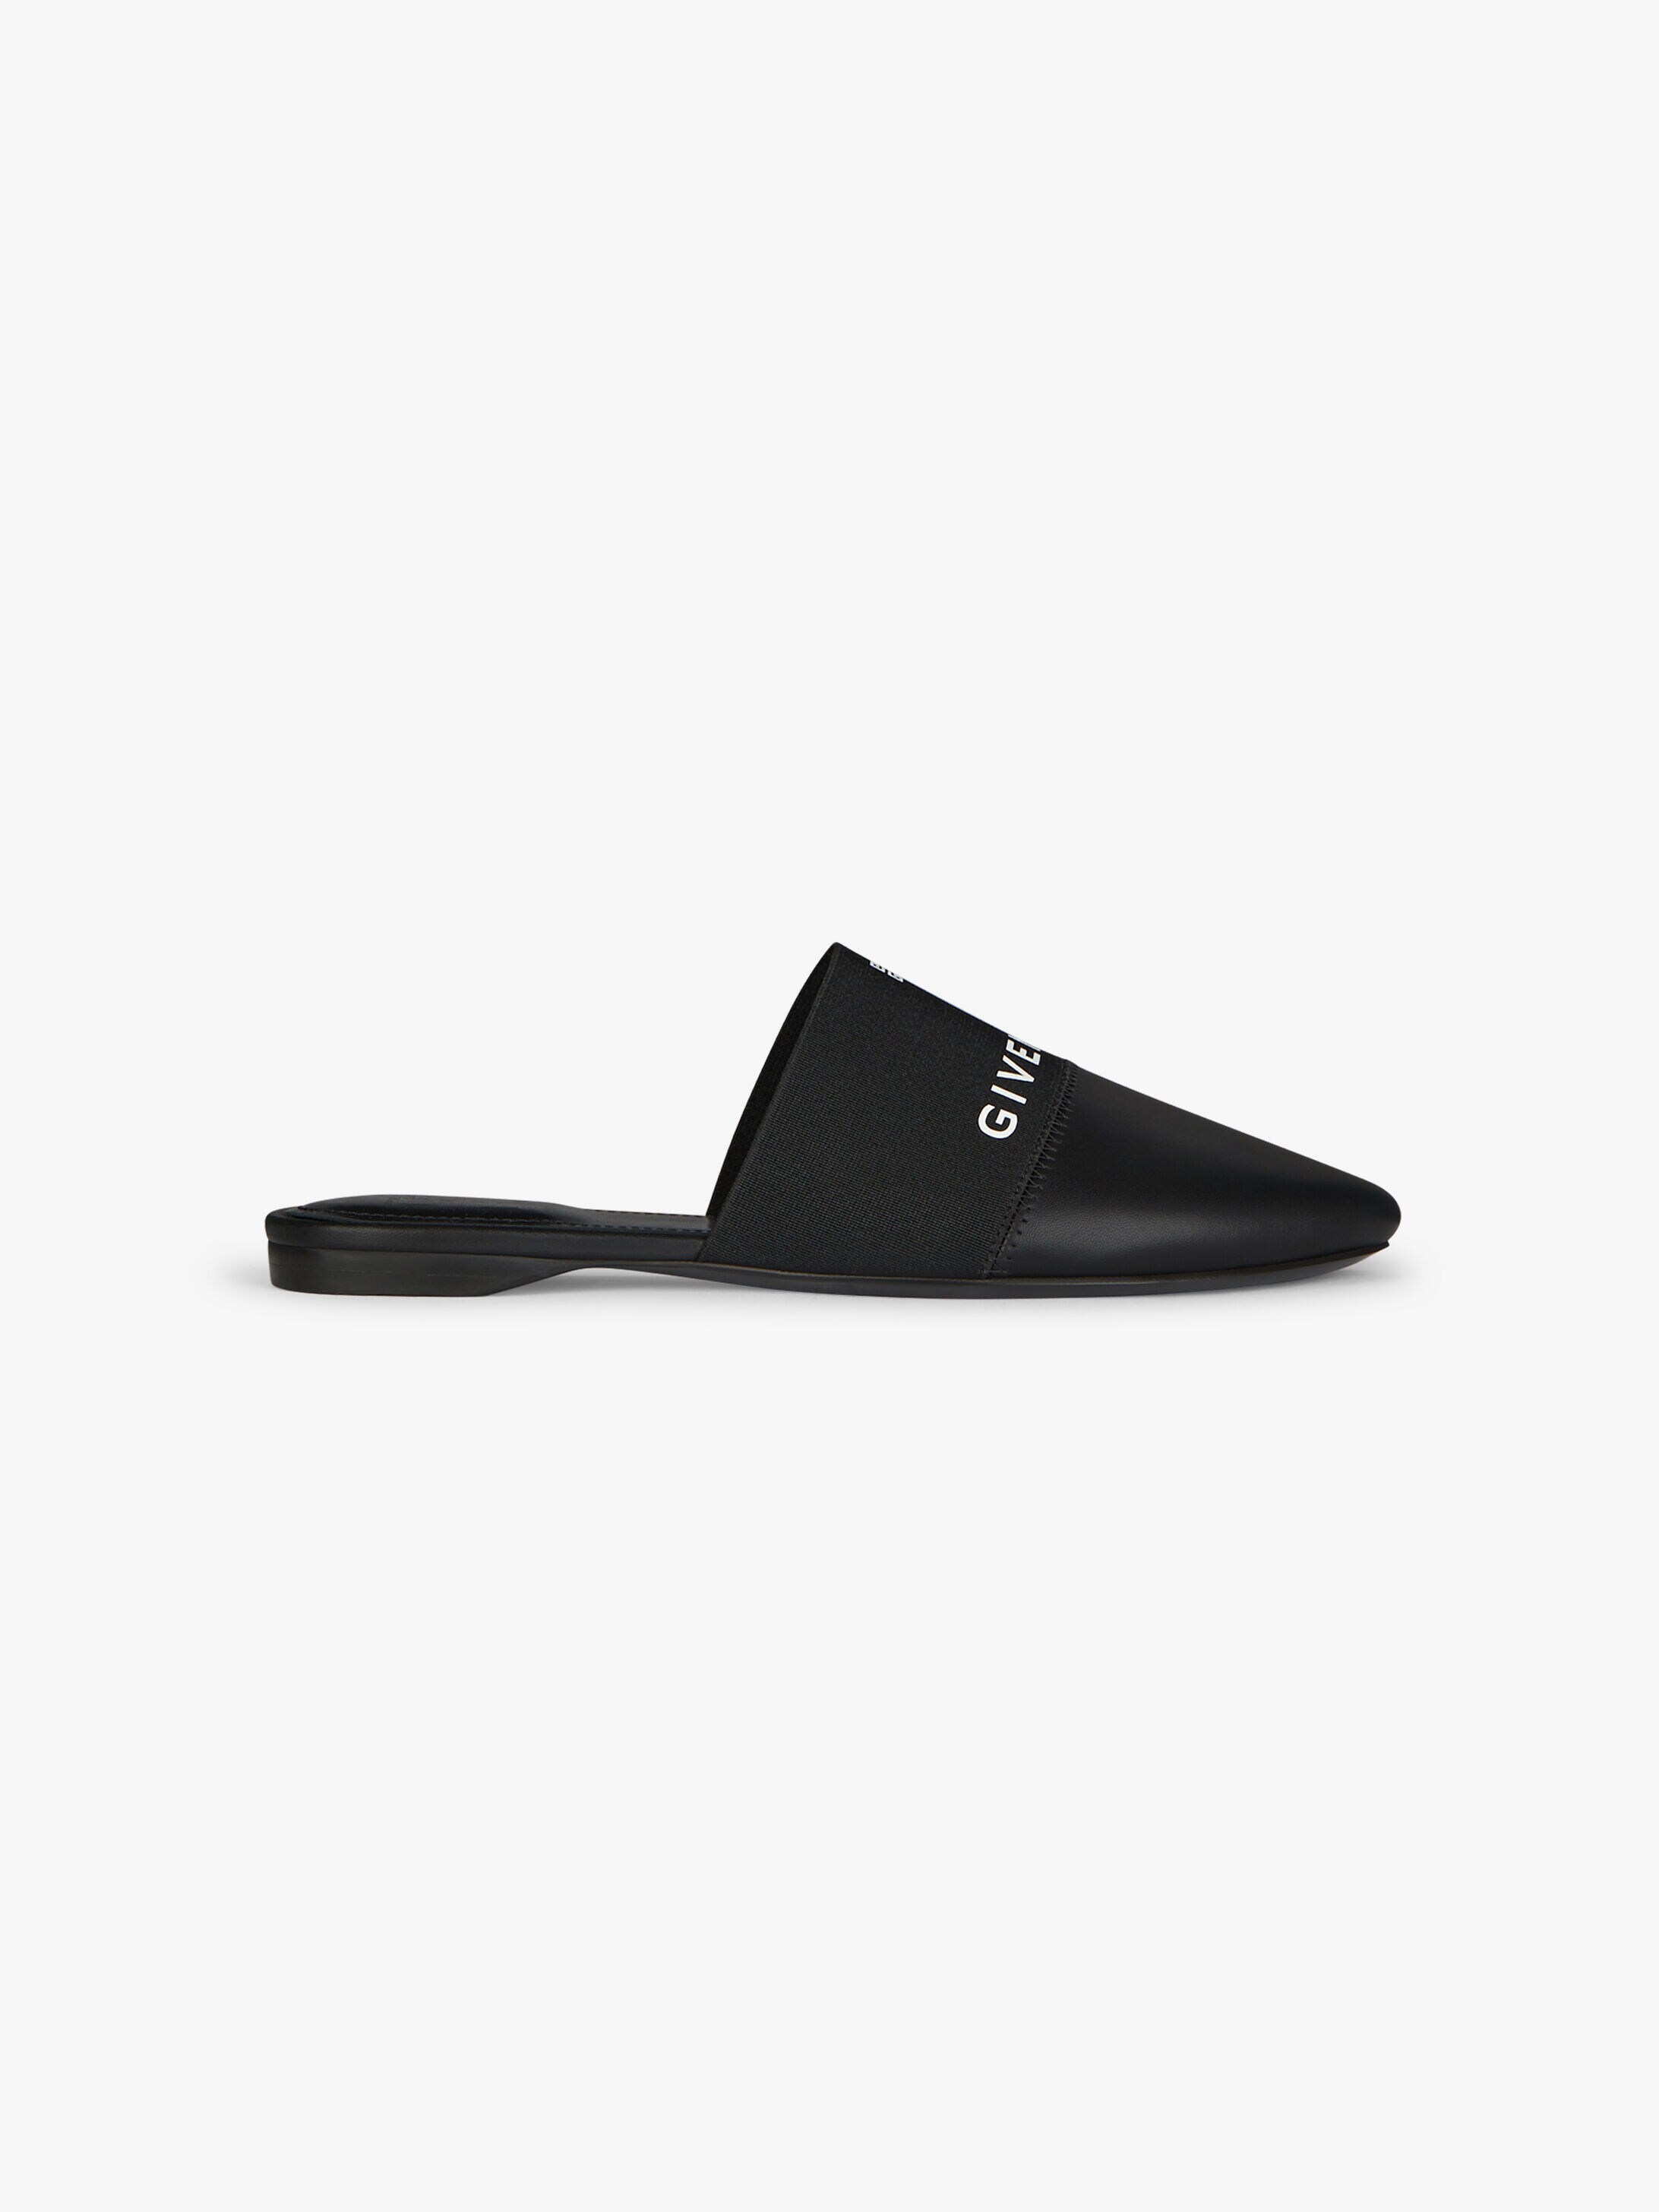 givenchy slides for women